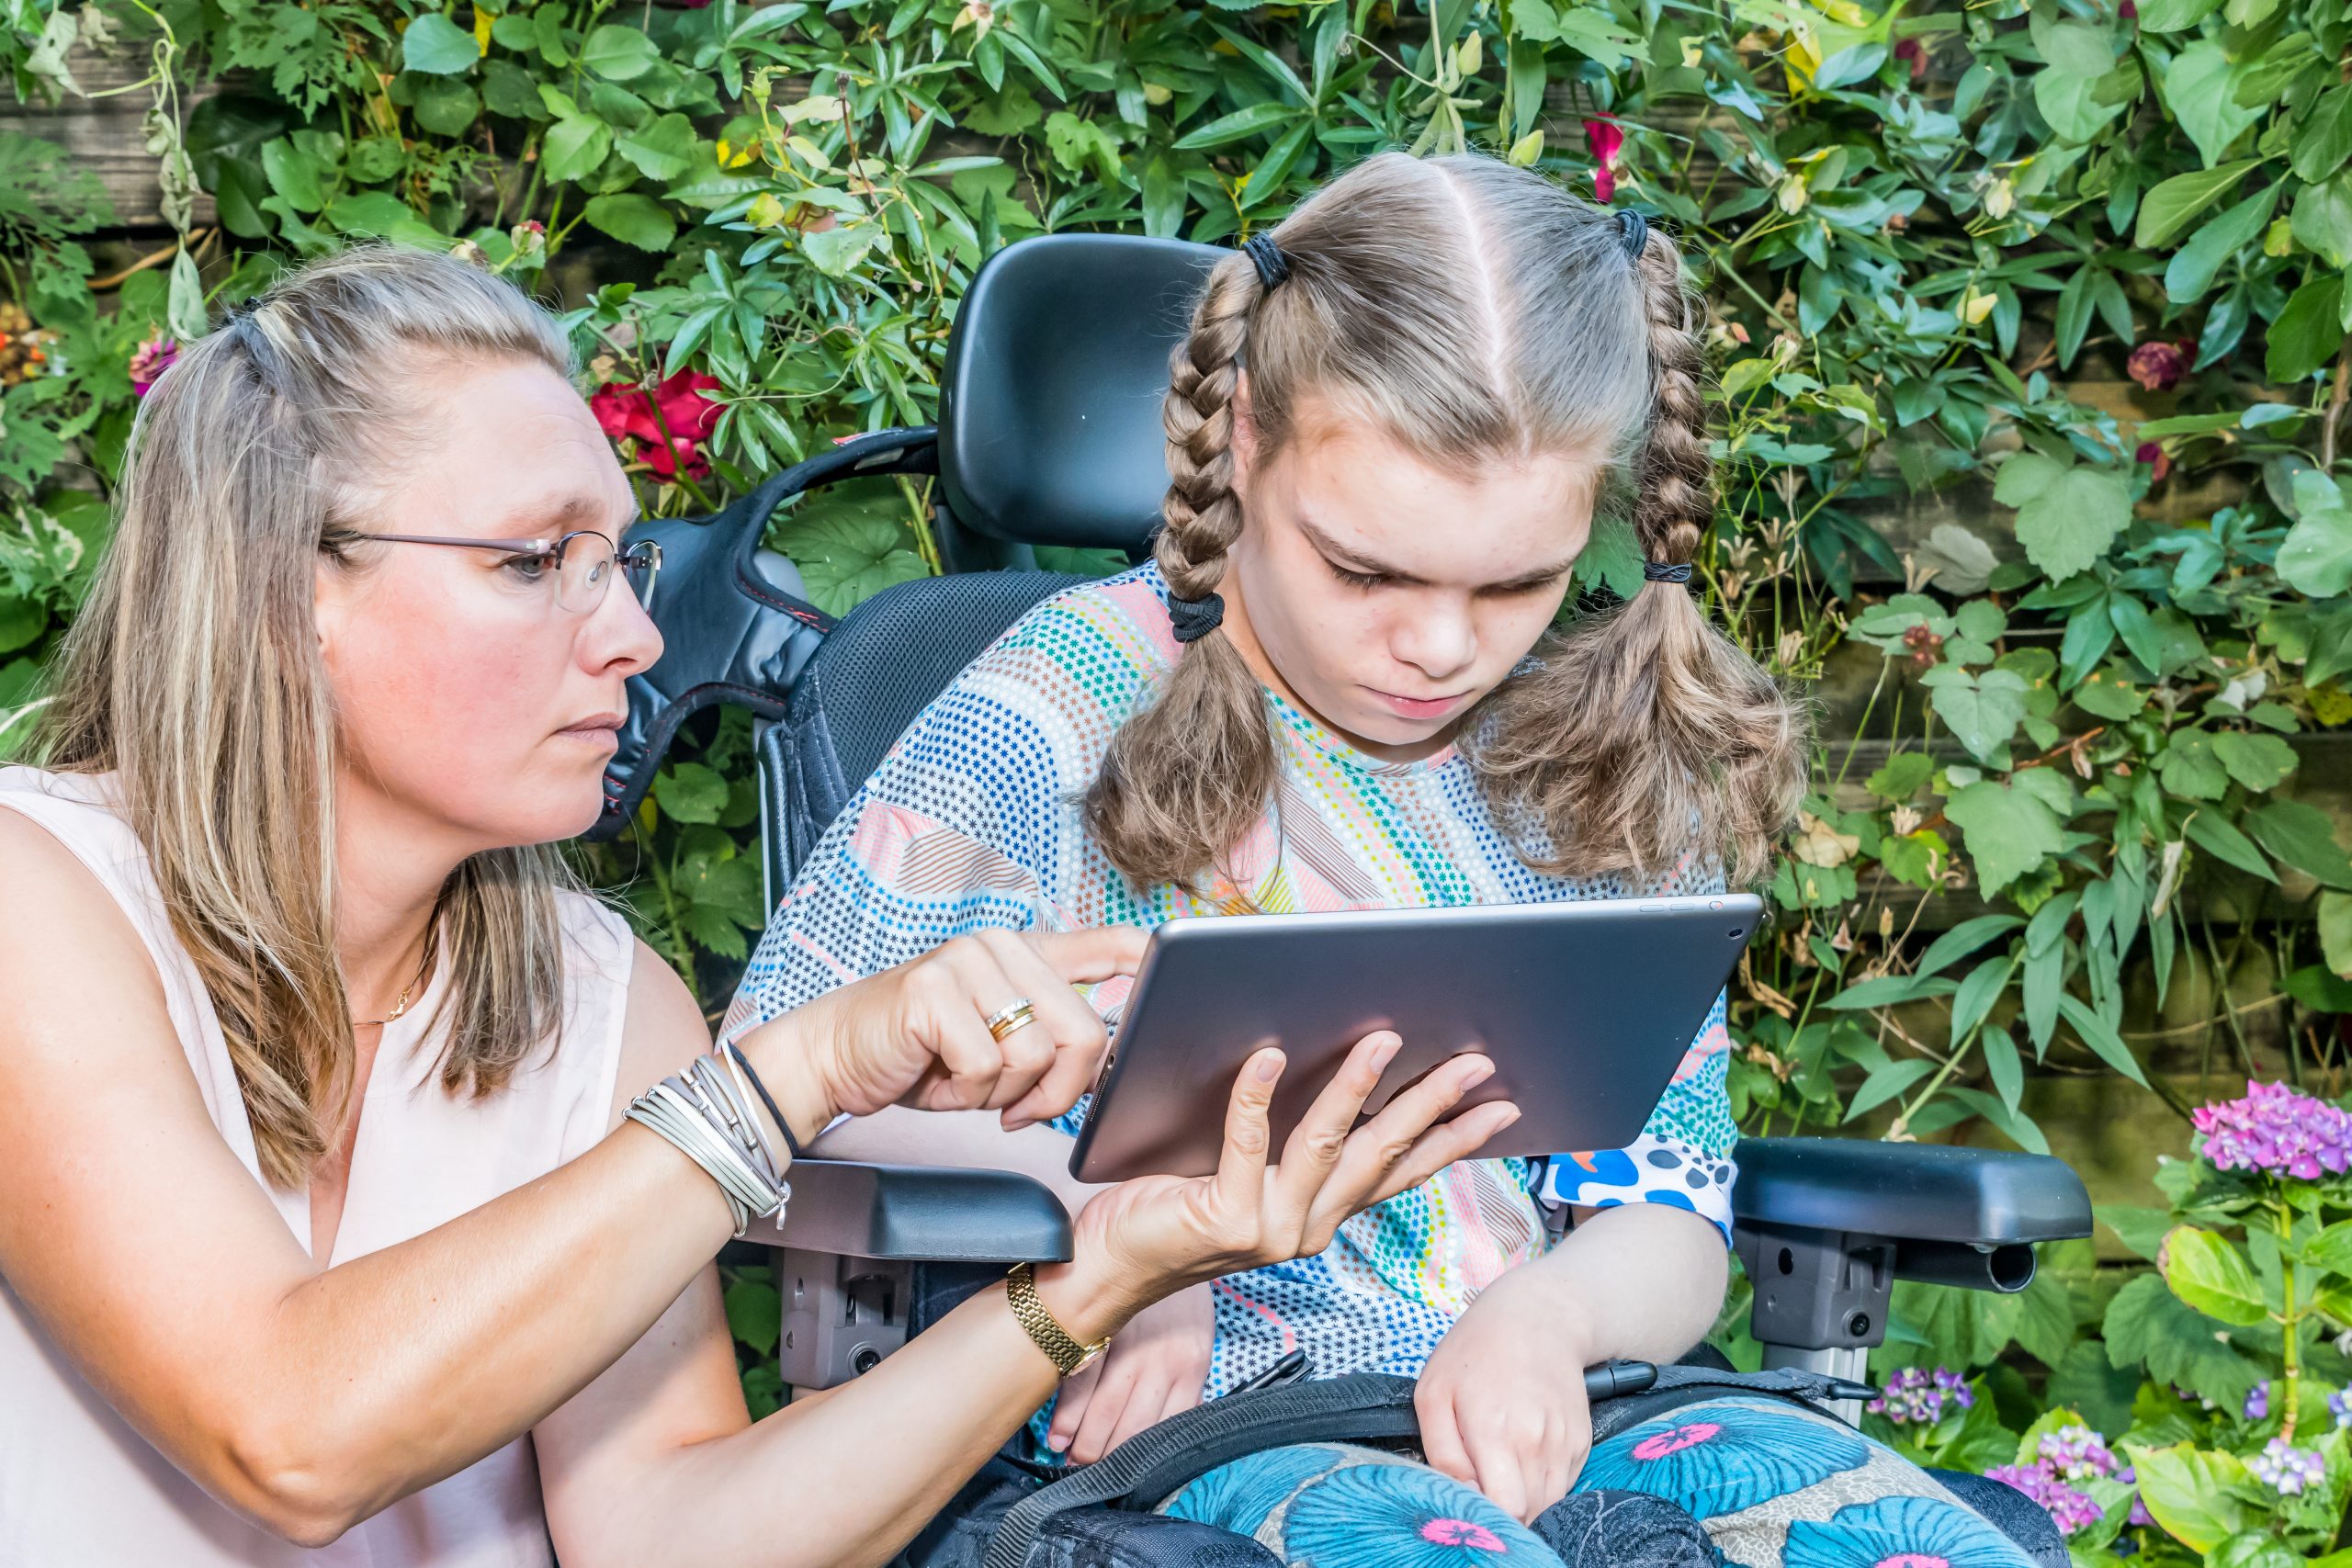 Disabled child in wheelchair receives I/DD services from a woman on tablet